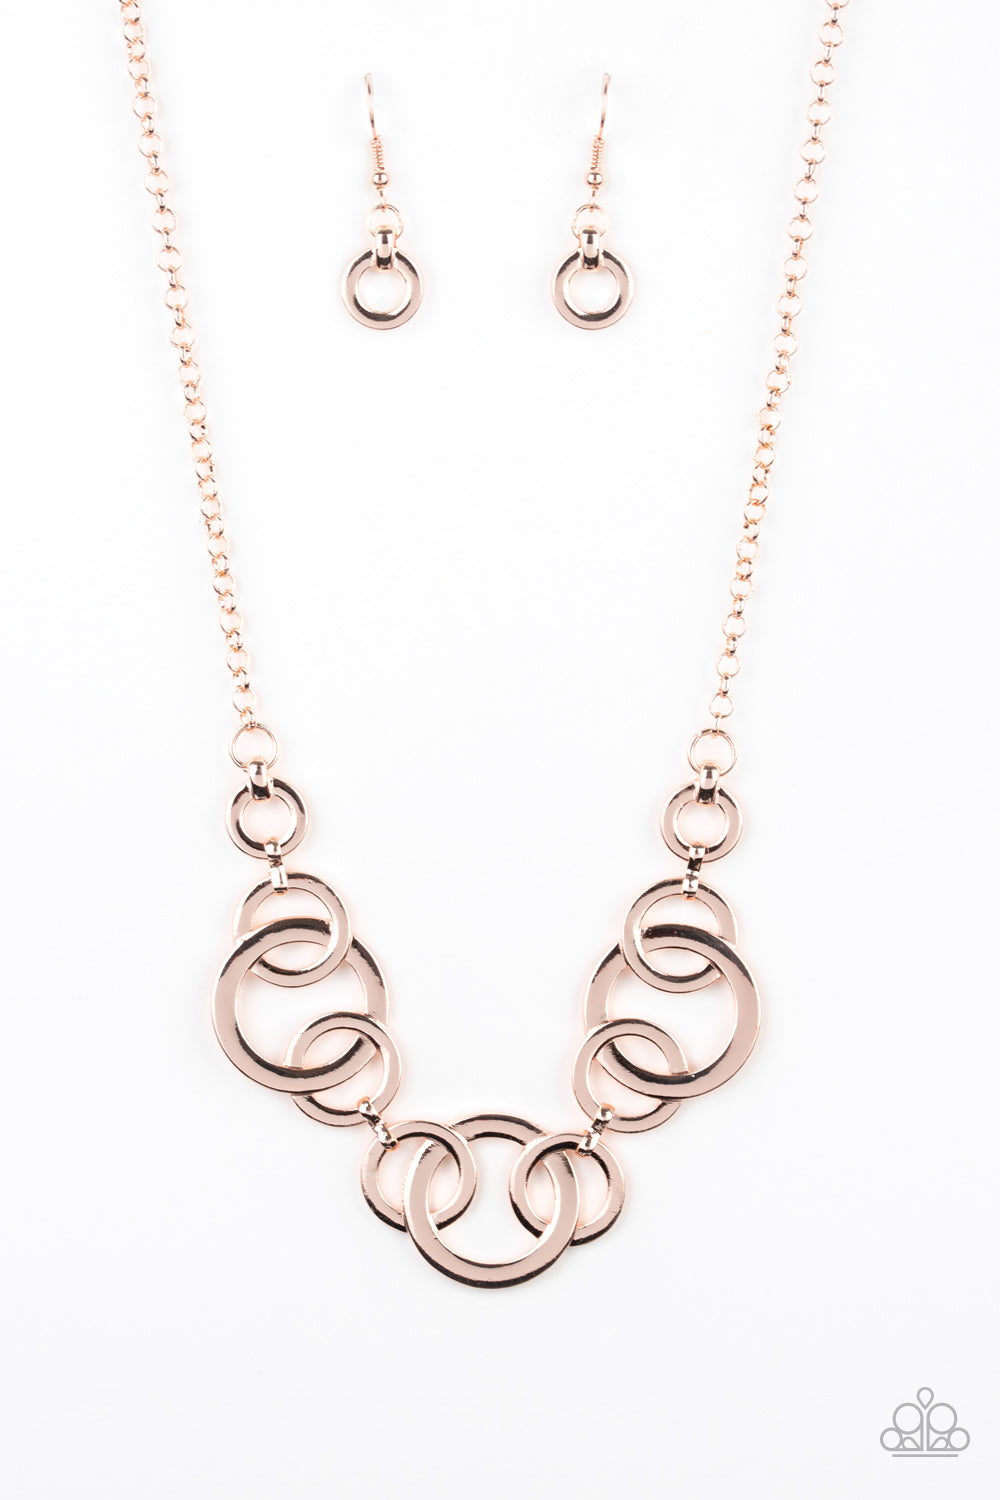 Going in Circles- Rose Gold - VJ Bedazzled Jewelry